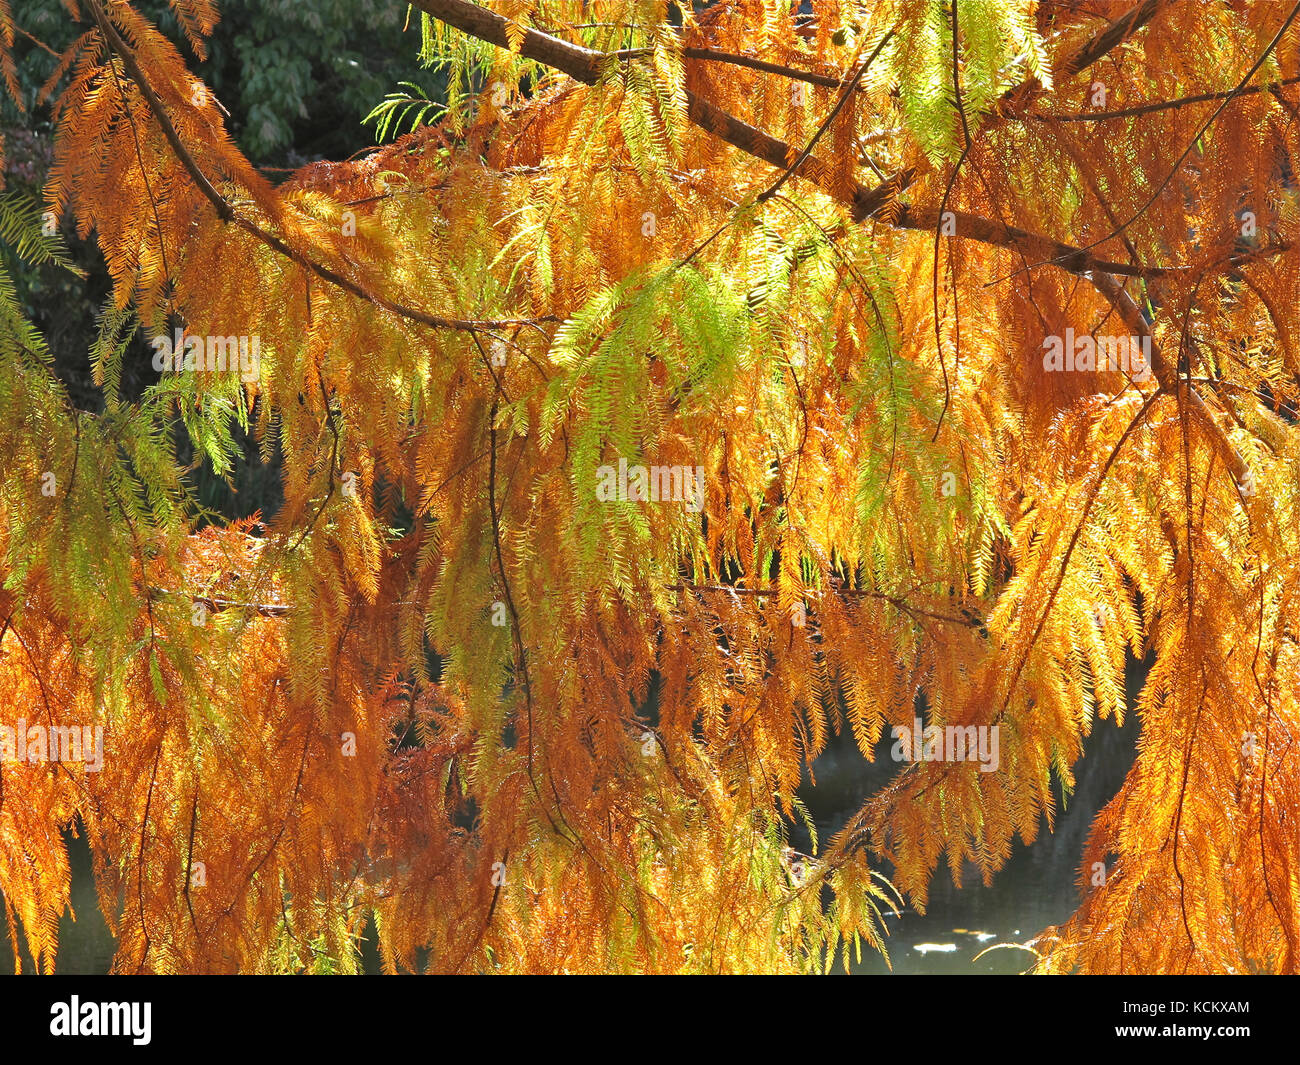 Swamp cypress (Taxodium distichum) foliage in autumn colour. A tree introduced to Australia from the southeastern and Gulf coastal plains of the Unite Stock Photo